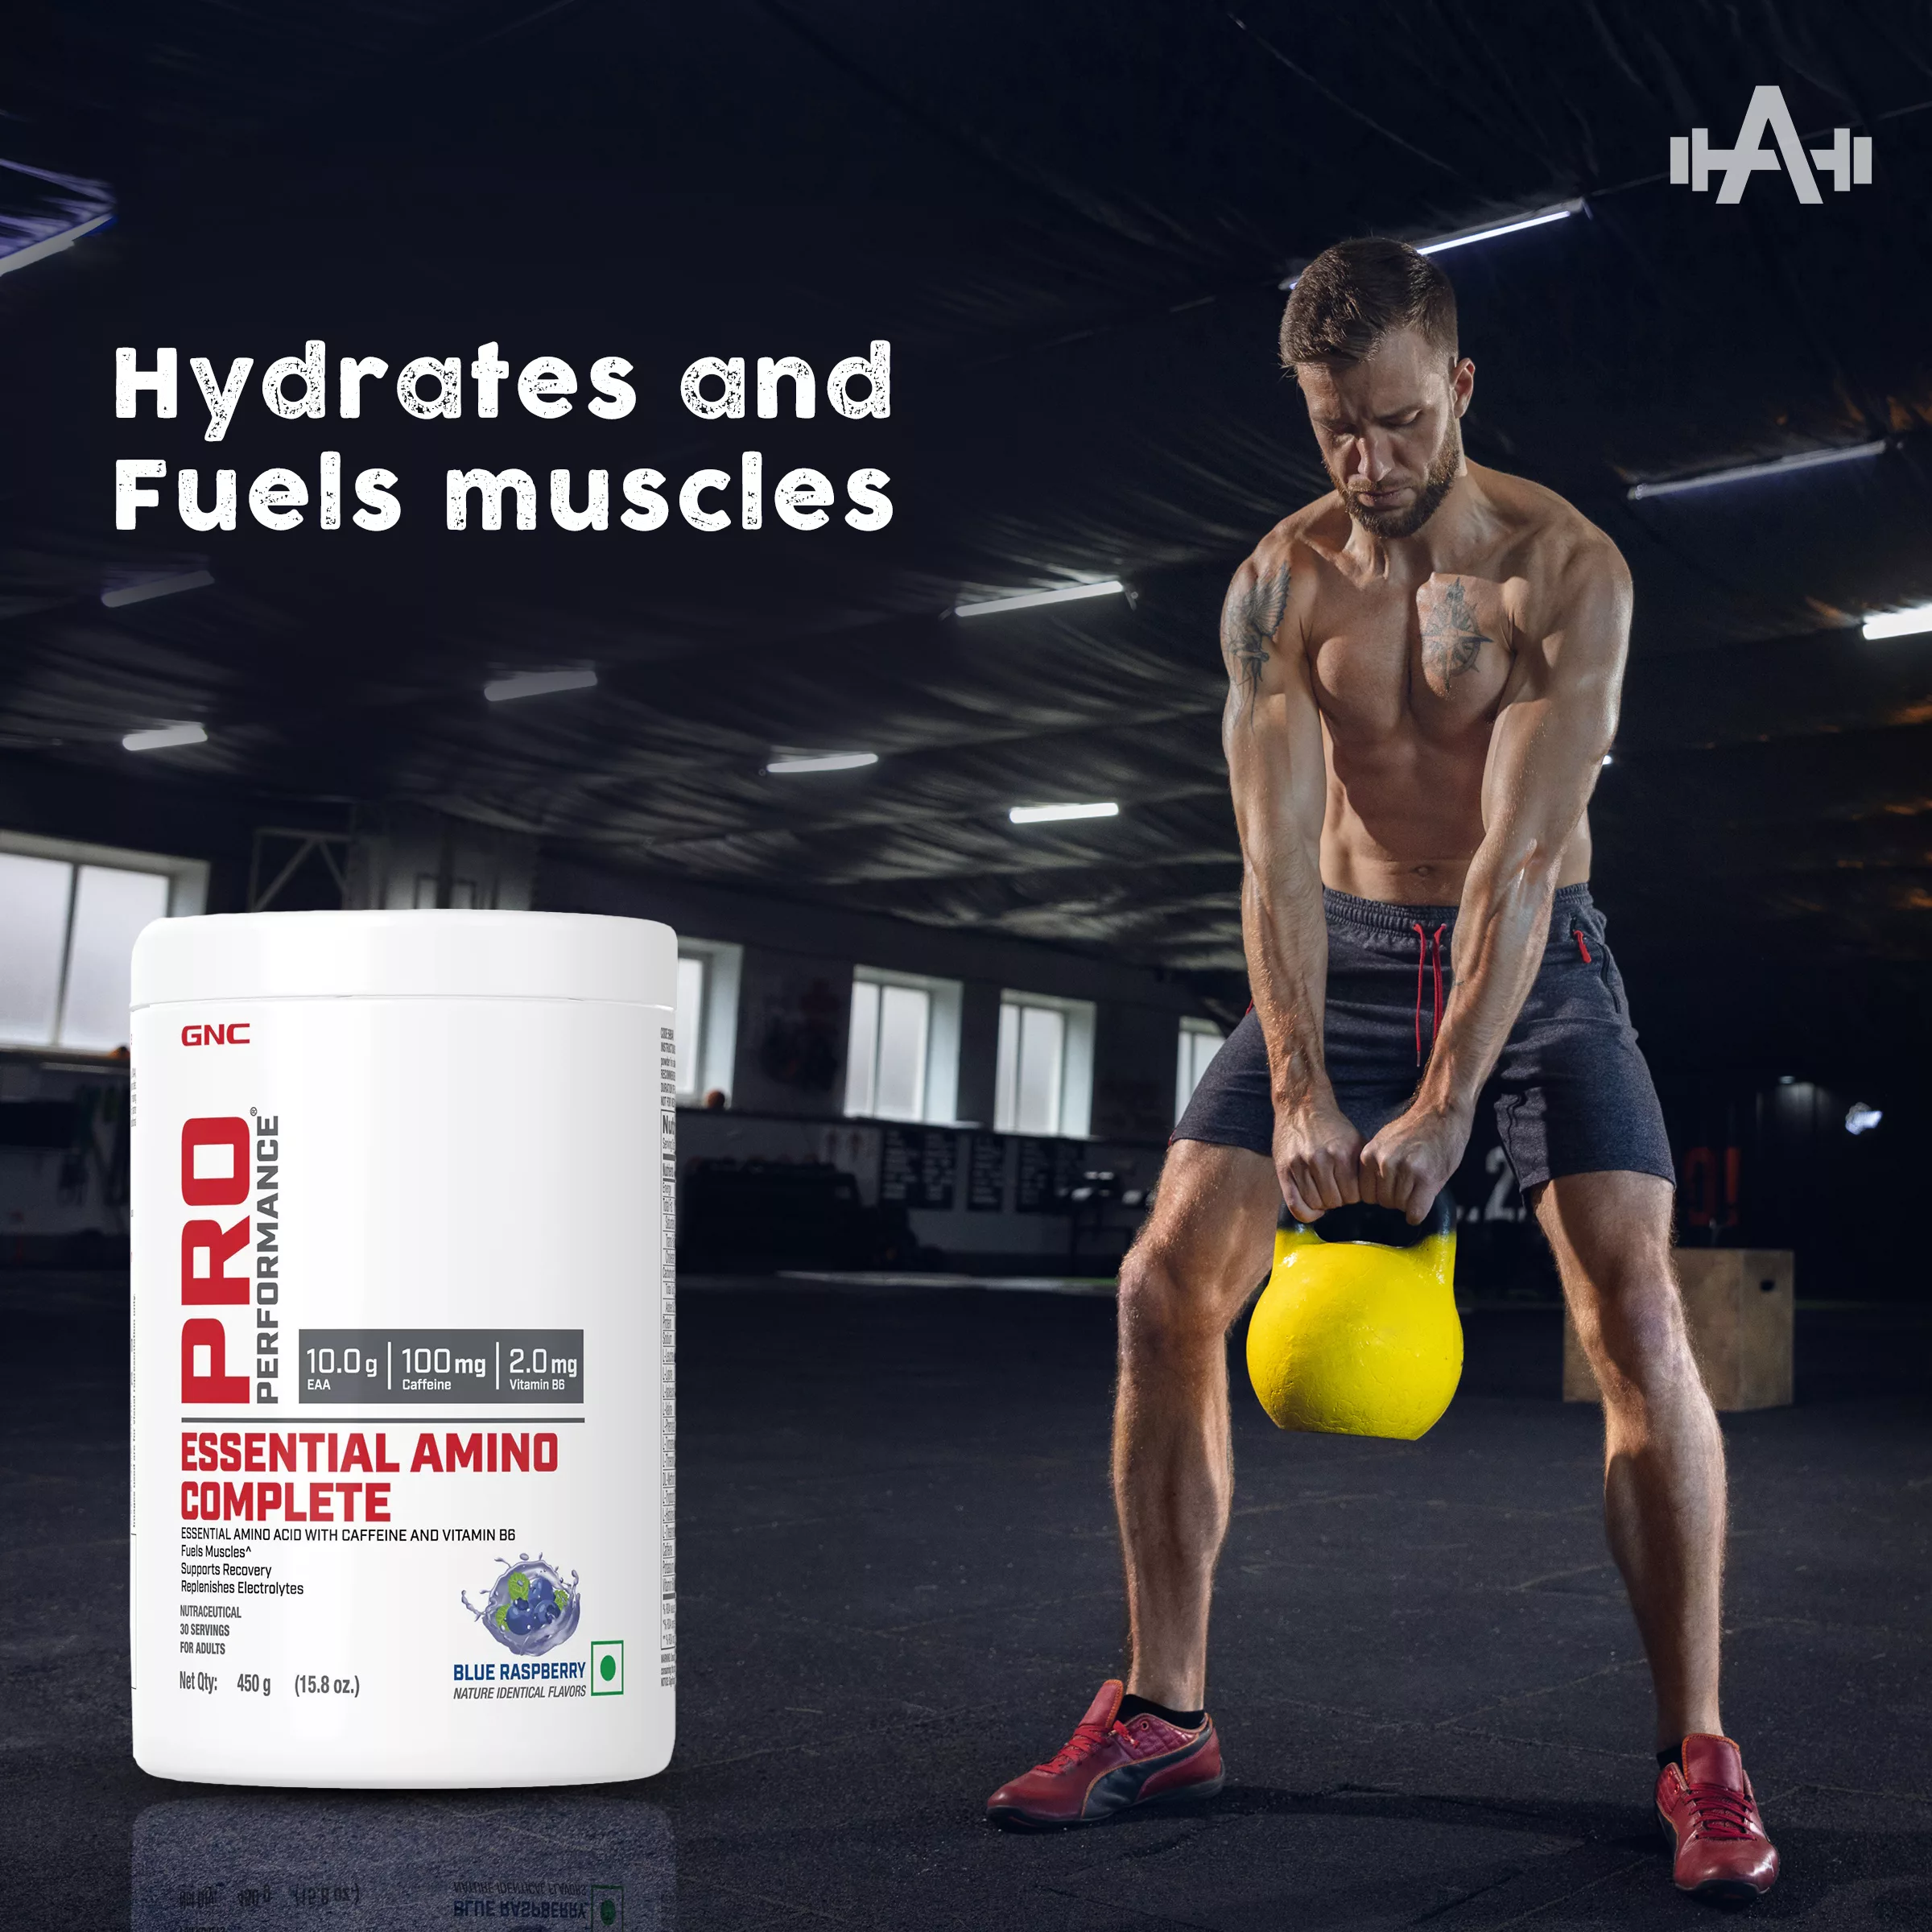 Hydrates and fuels muscles